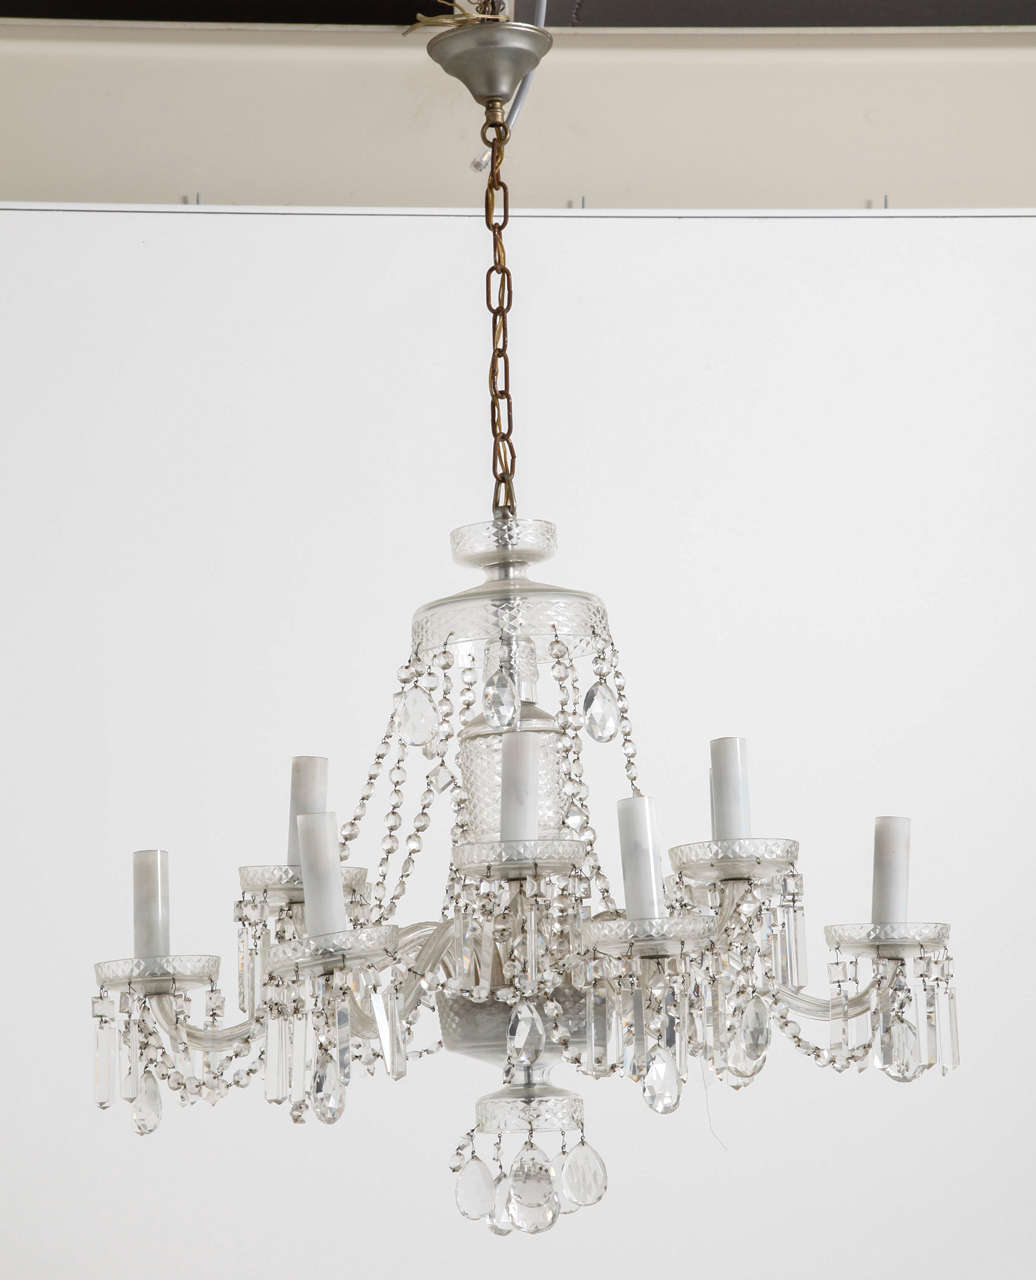 Twelve arms crystal chandelier with ornaments and opaline candlesticks, the crystal beads are all handcrafted that increase the quality of the chandelier due the reflection of light twinkling in the crystal parts.
Perfect original condition. Fitted